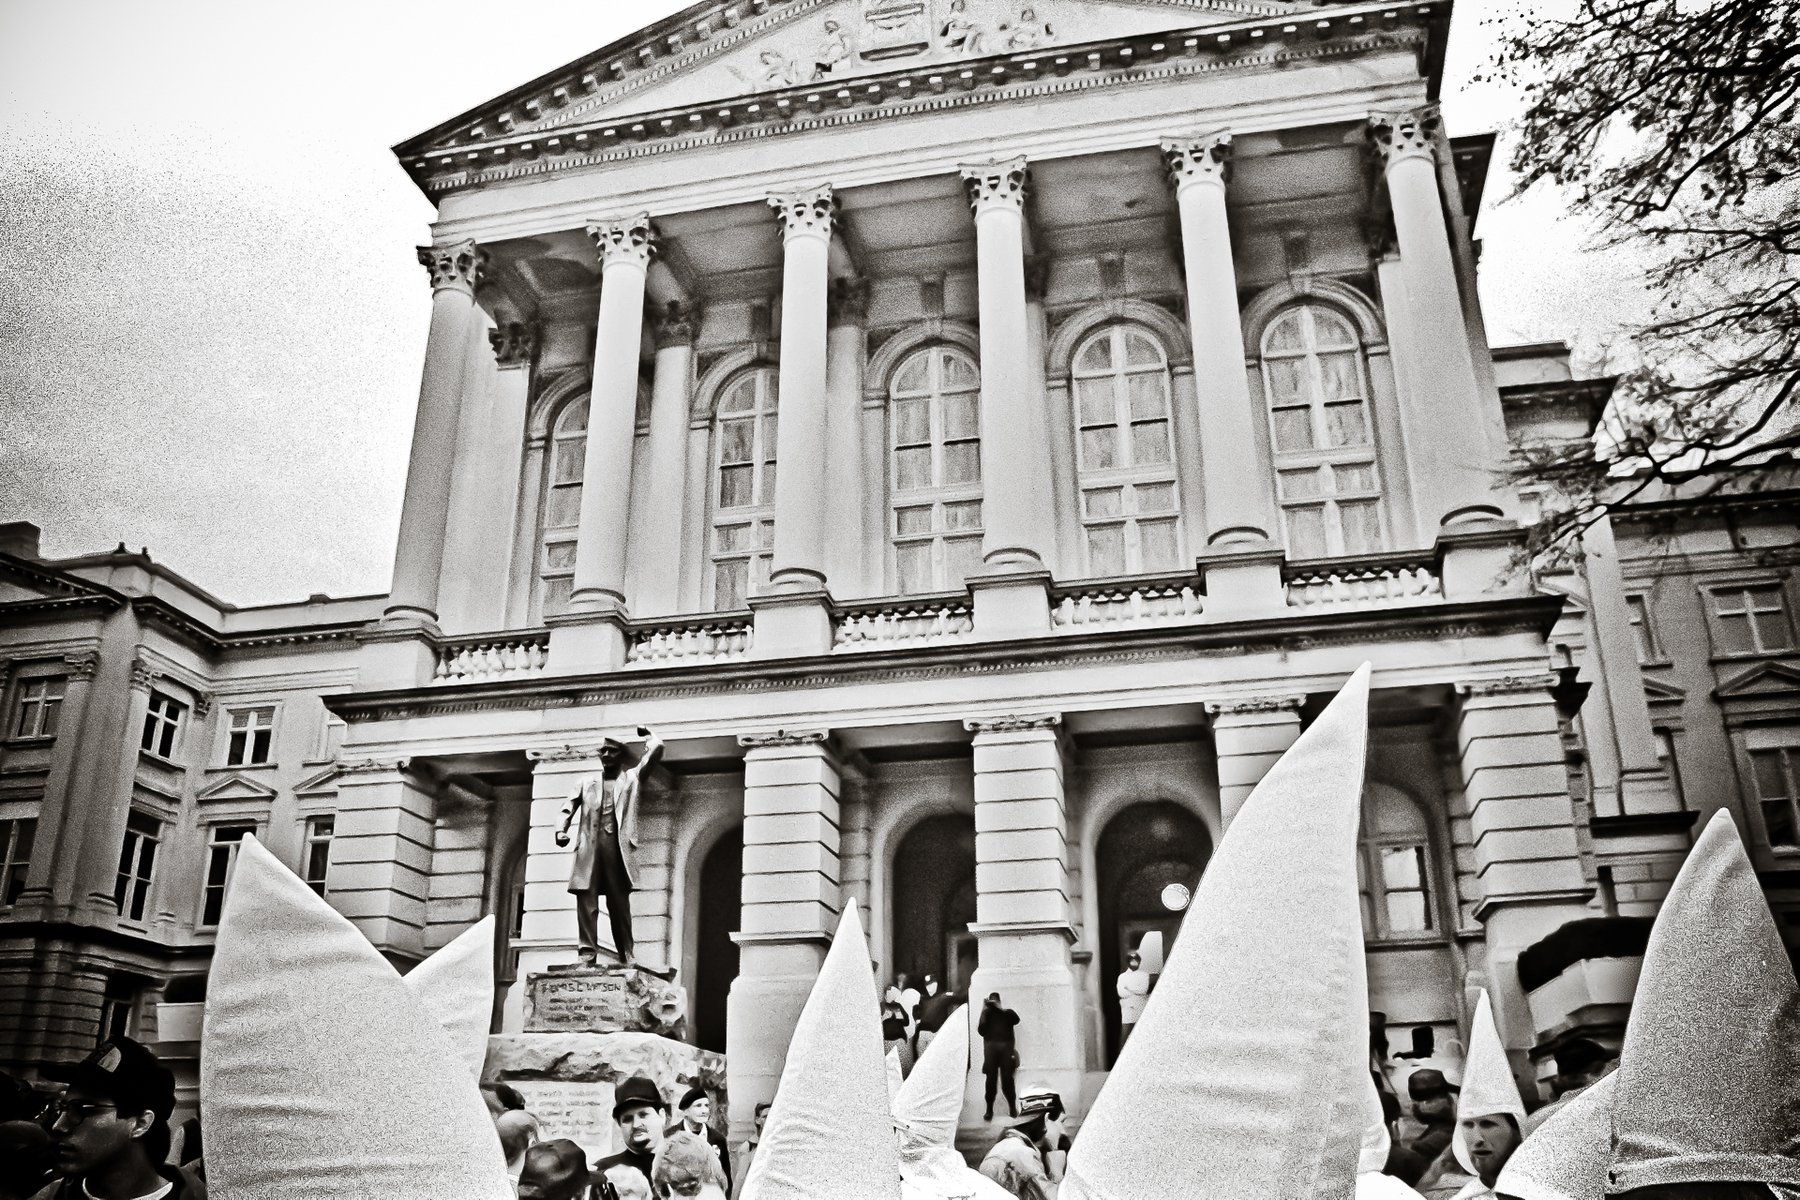 January 6, 1990 - Atlanta, GA. 50 Ku Klux Klan members and supporters gathered Saturday at the state Capitol to protest the holiday honoring Dr. Martin Luther King Jr.